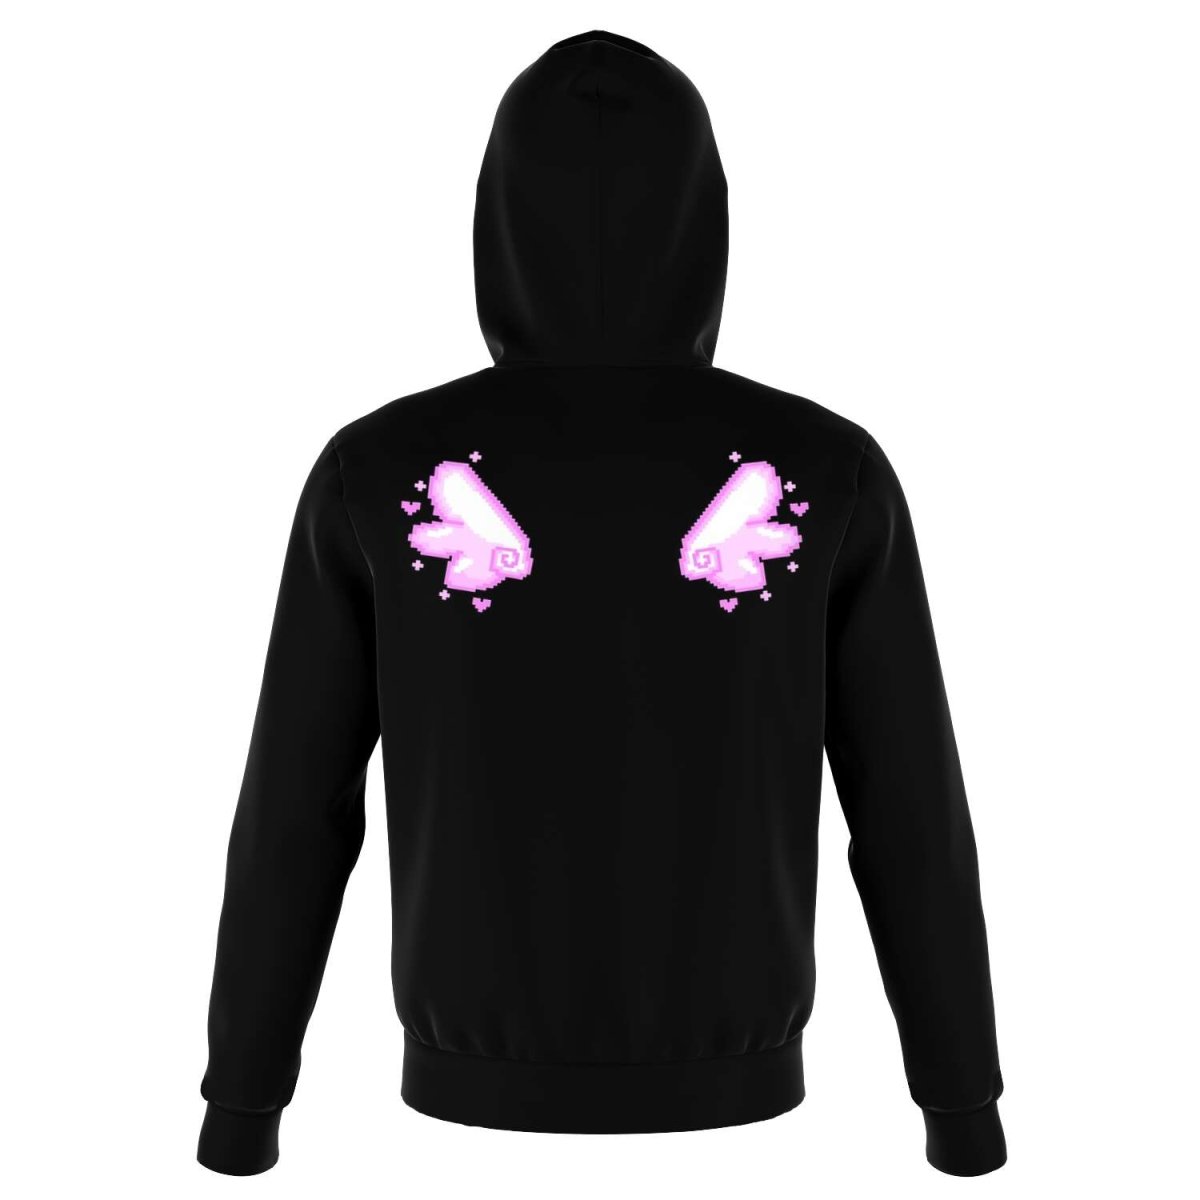 CHASEICON ALL OVER HOODIE - dragqueenmerch